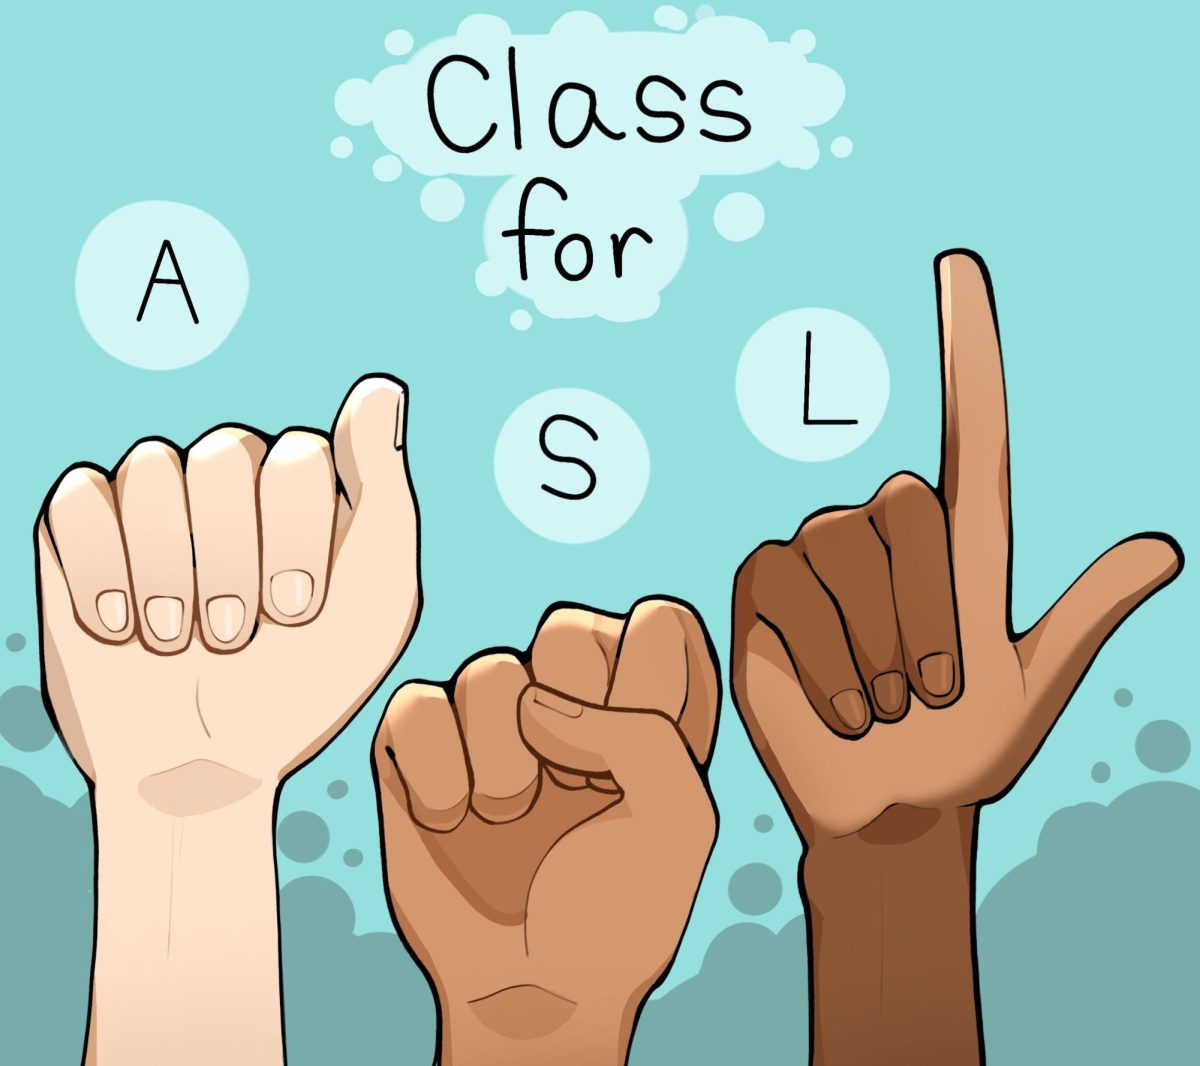 ASL+should+become+an+option+for+high+school+language+requirements